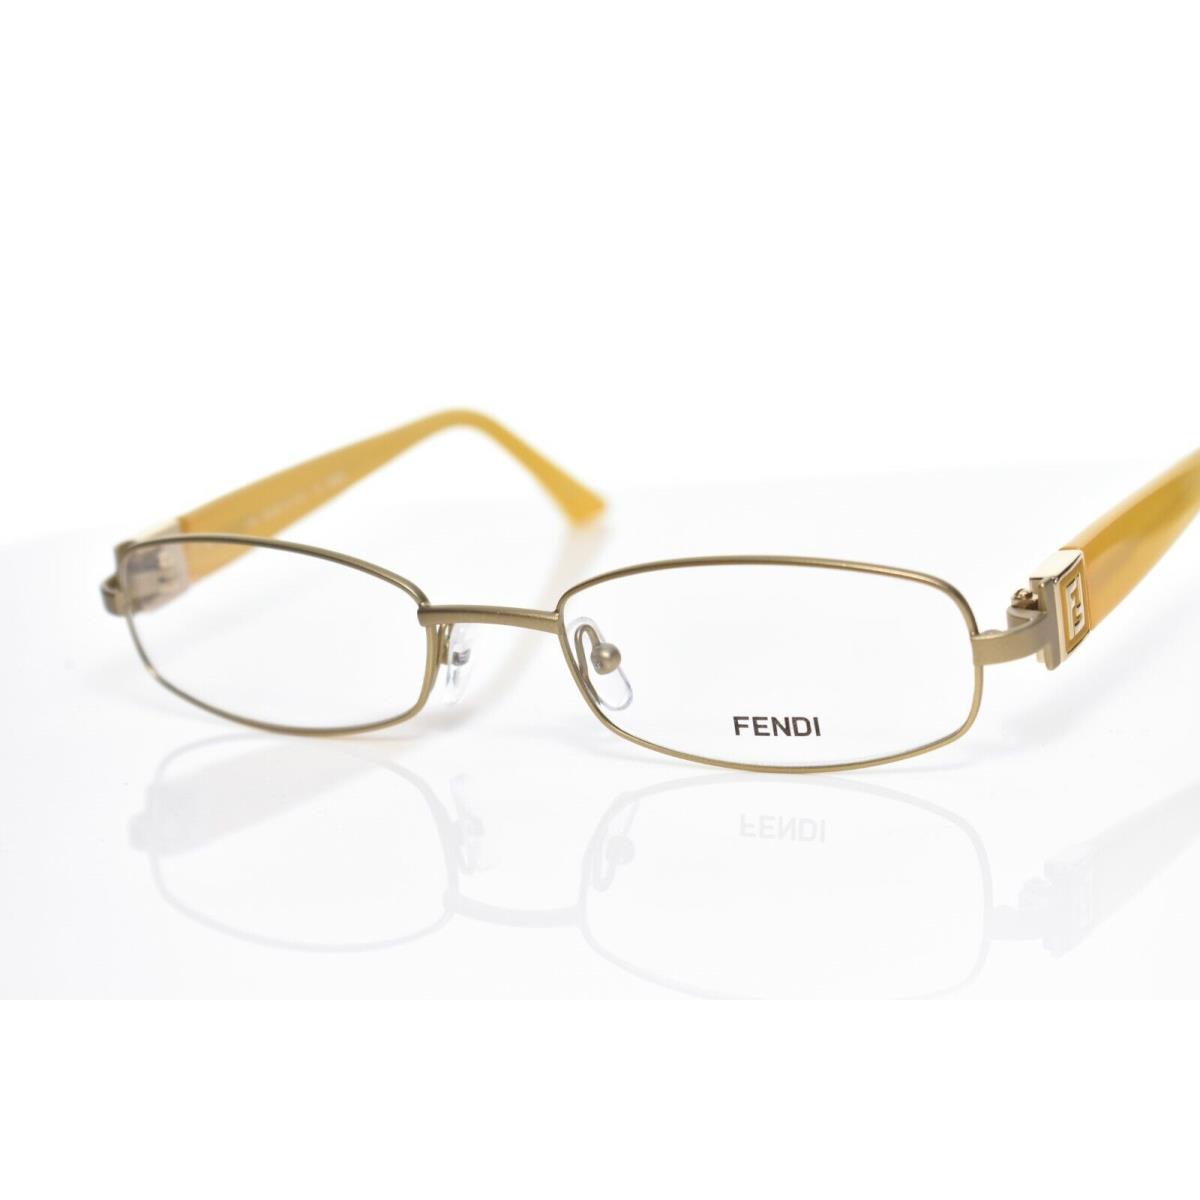 Fendi 905 715 Eyeglasses with Replaced Nose Pads 52-19-130